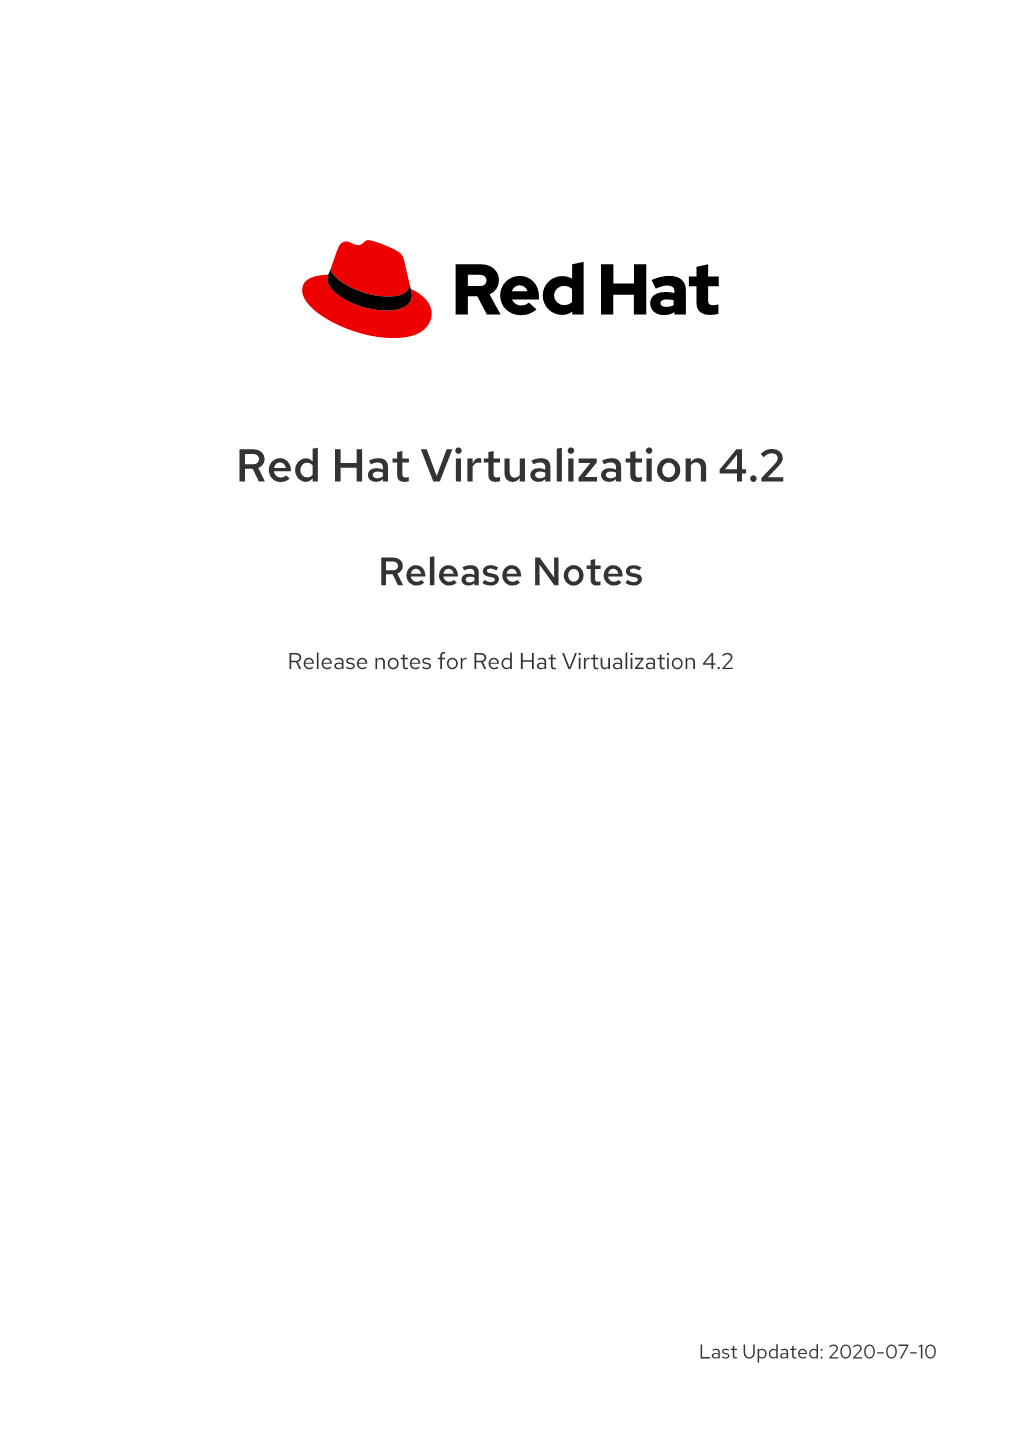 Red Hat Virtualization 4.2 Release Notes